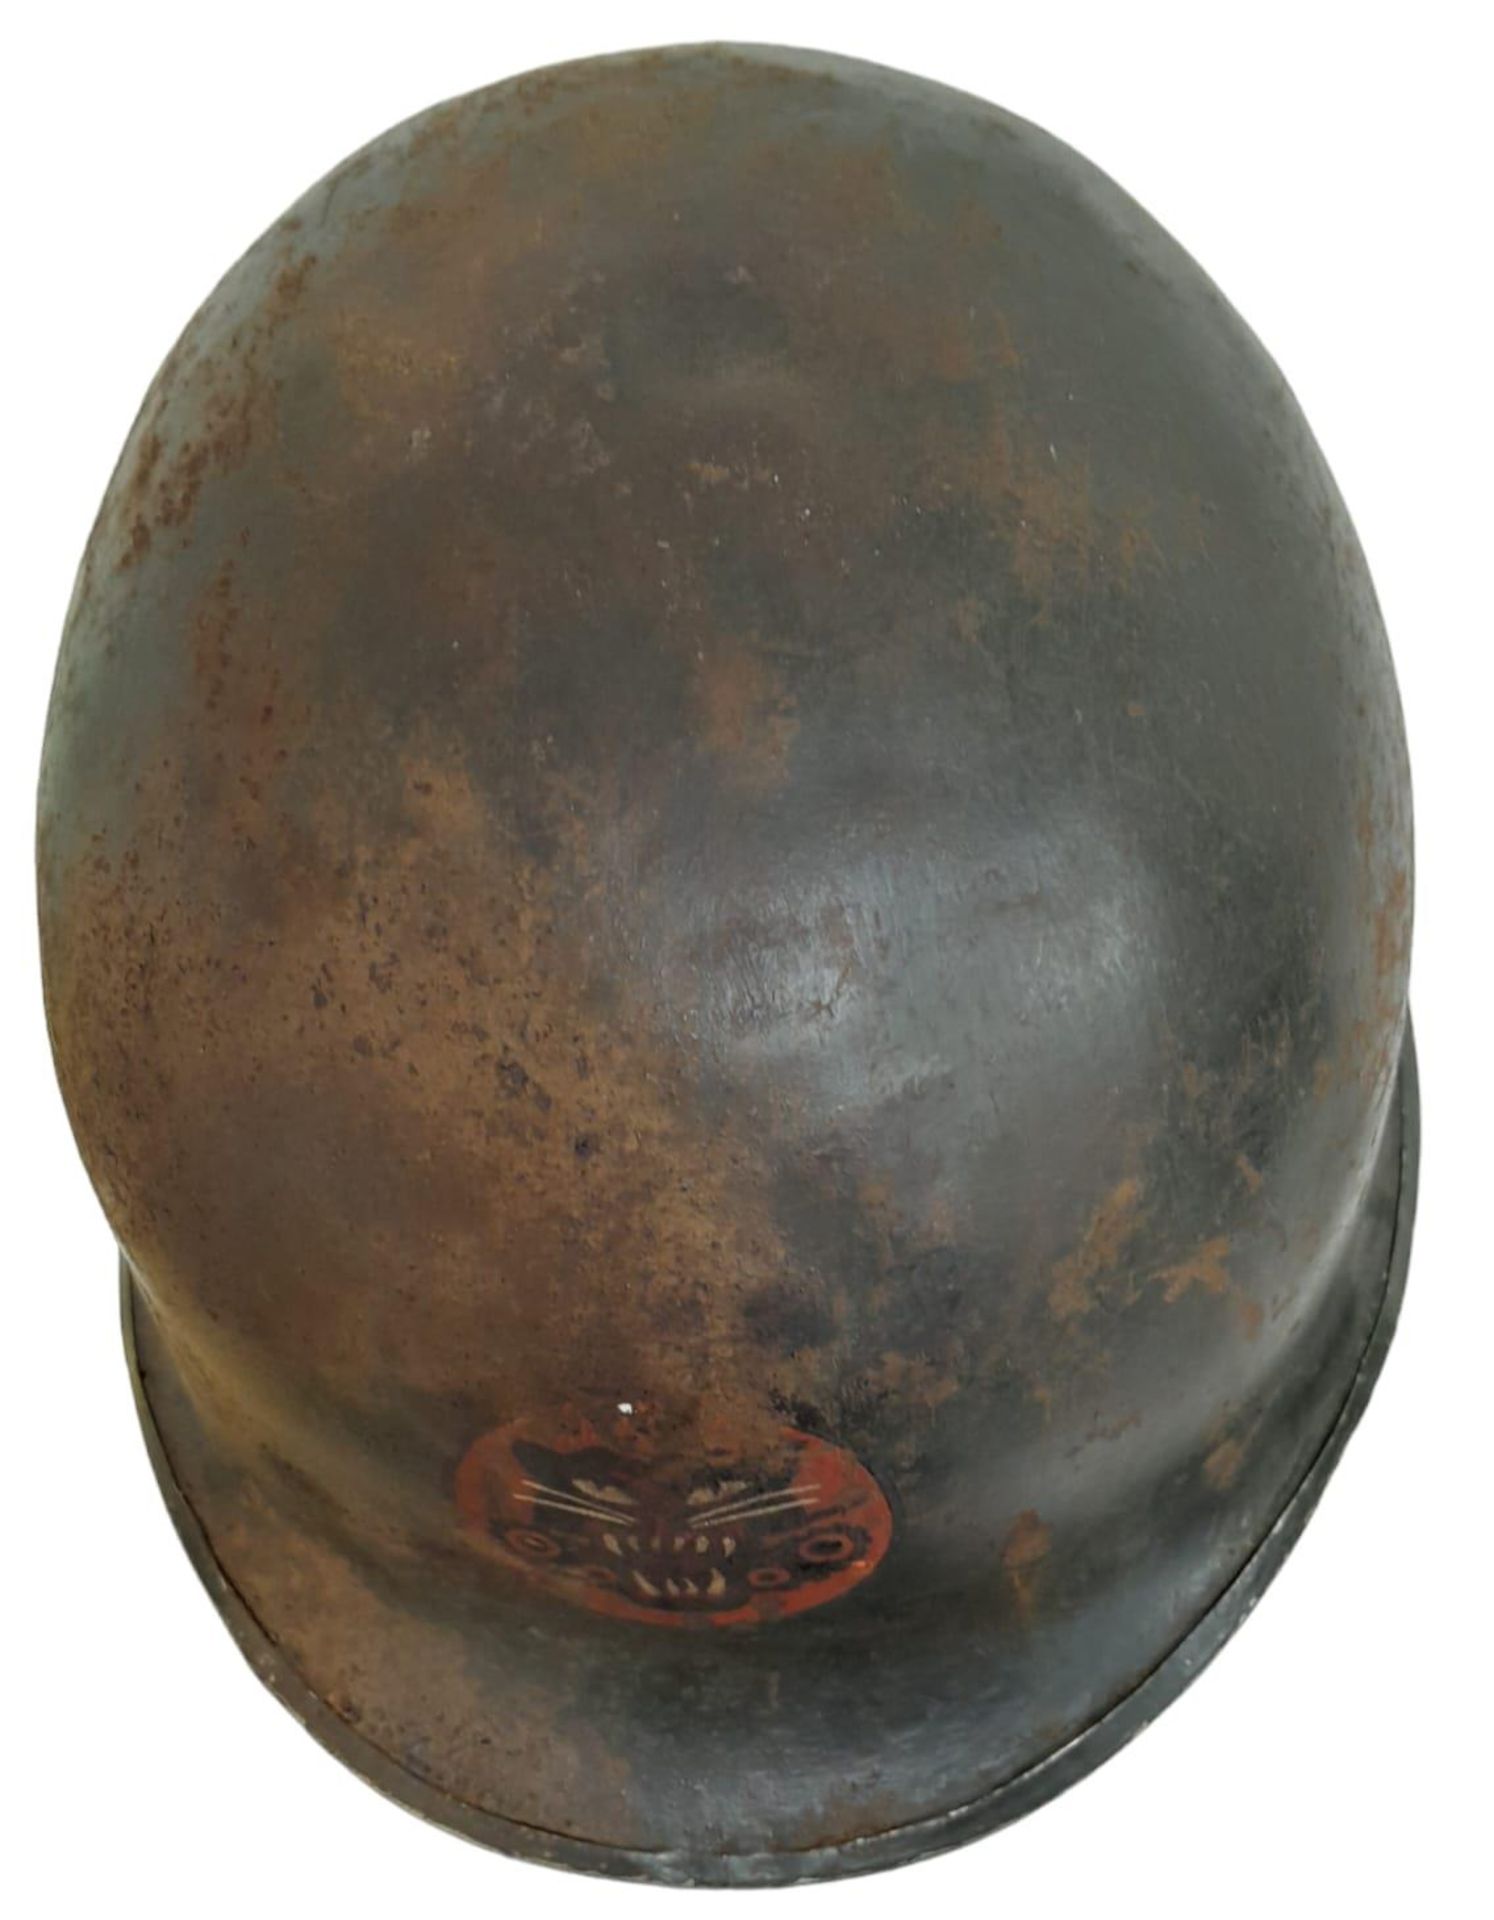 WW2 US Front Seam Swivel Bale M1 Helmet. Badged to a Tank Destroyer Unit. Found in a junk shop - Image 4 of 9